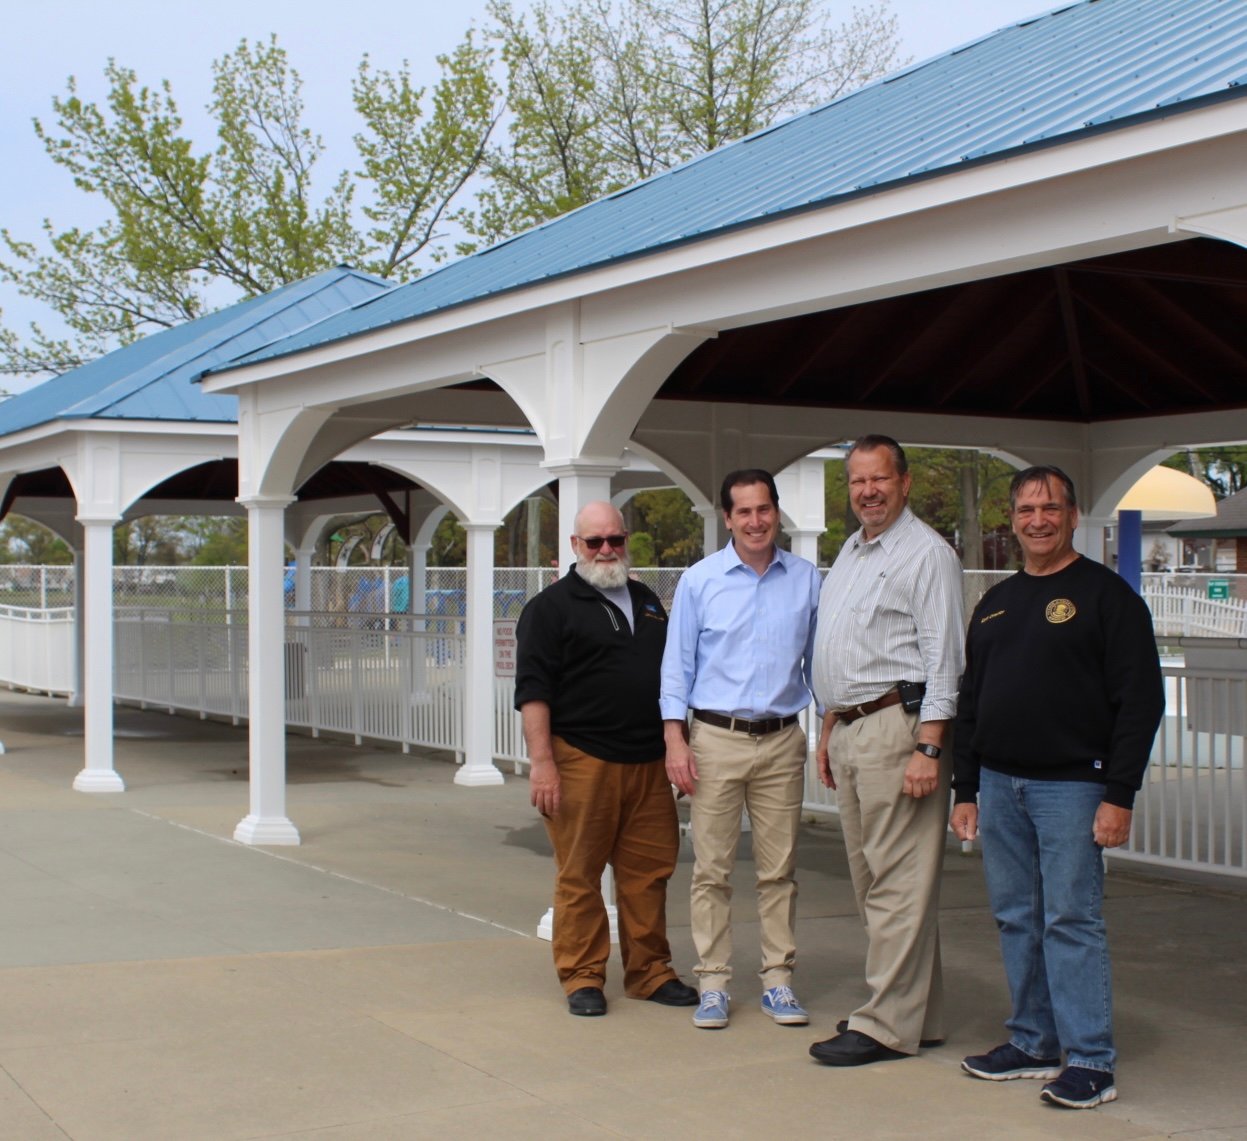 Kaminsky secured a $50,000 grant for a pavilion at the Hendrickson Park pool complex. Senator Todd Kaminsky, center left, poses with Mayor Edwin Fare, immediate right, in front of the new pavilion with Department of Recreation staff.